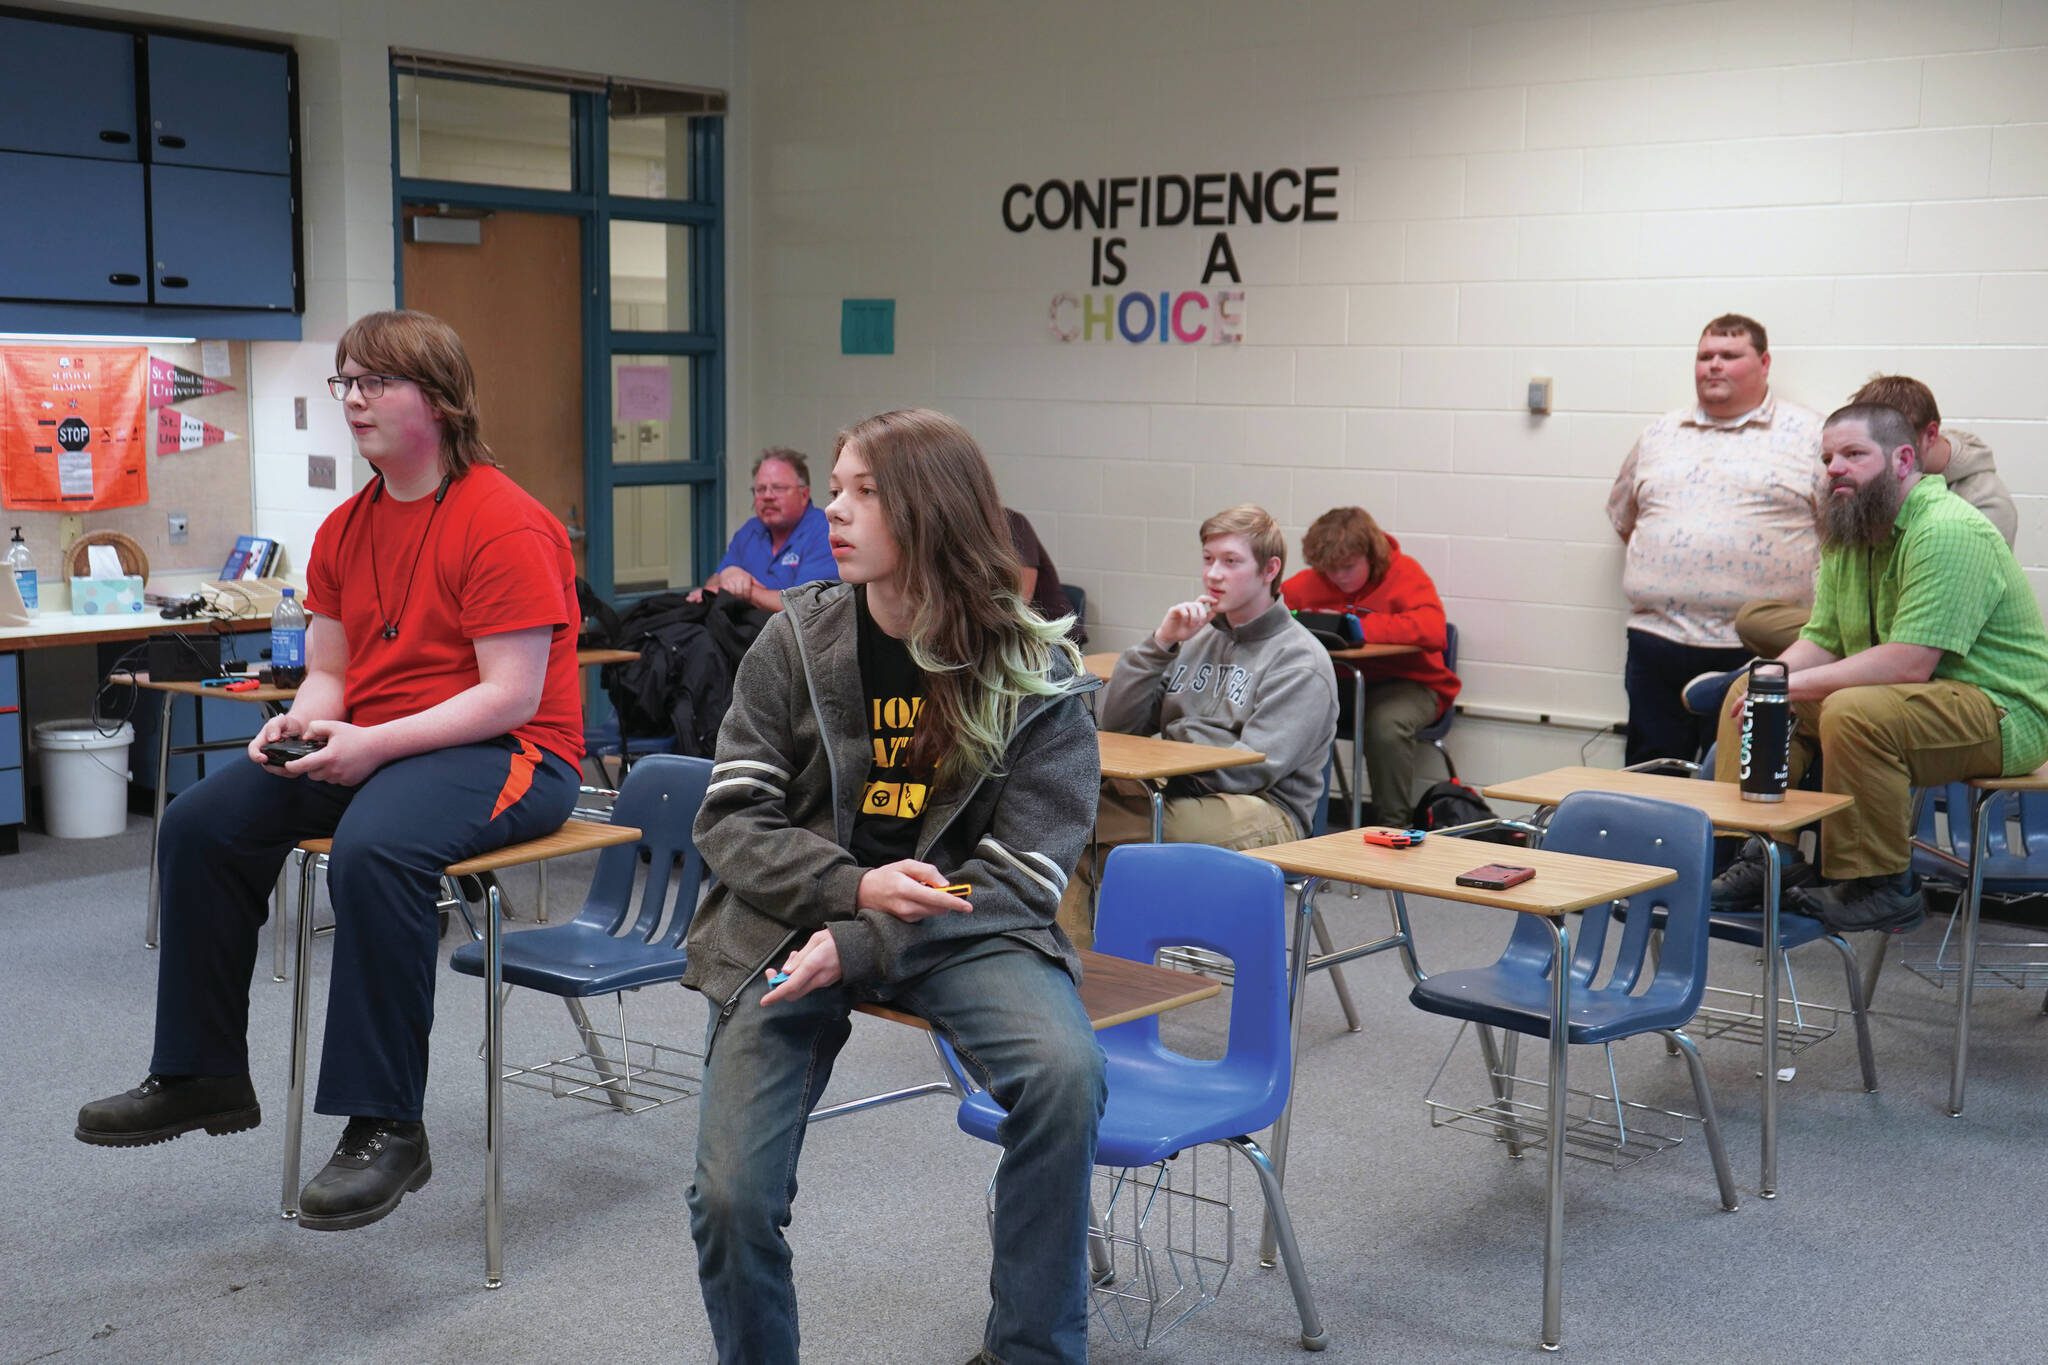 Players, coaches and parents watch as Kenai’s Boyd Lehmberg and Nikiski’s Lincoln Kimbell play the final round of competition for a Super Smash Bros. Ultimate match at Nikiski Middle/High School on Oct. 23. (Jake Dye/Peninsula Clarion)